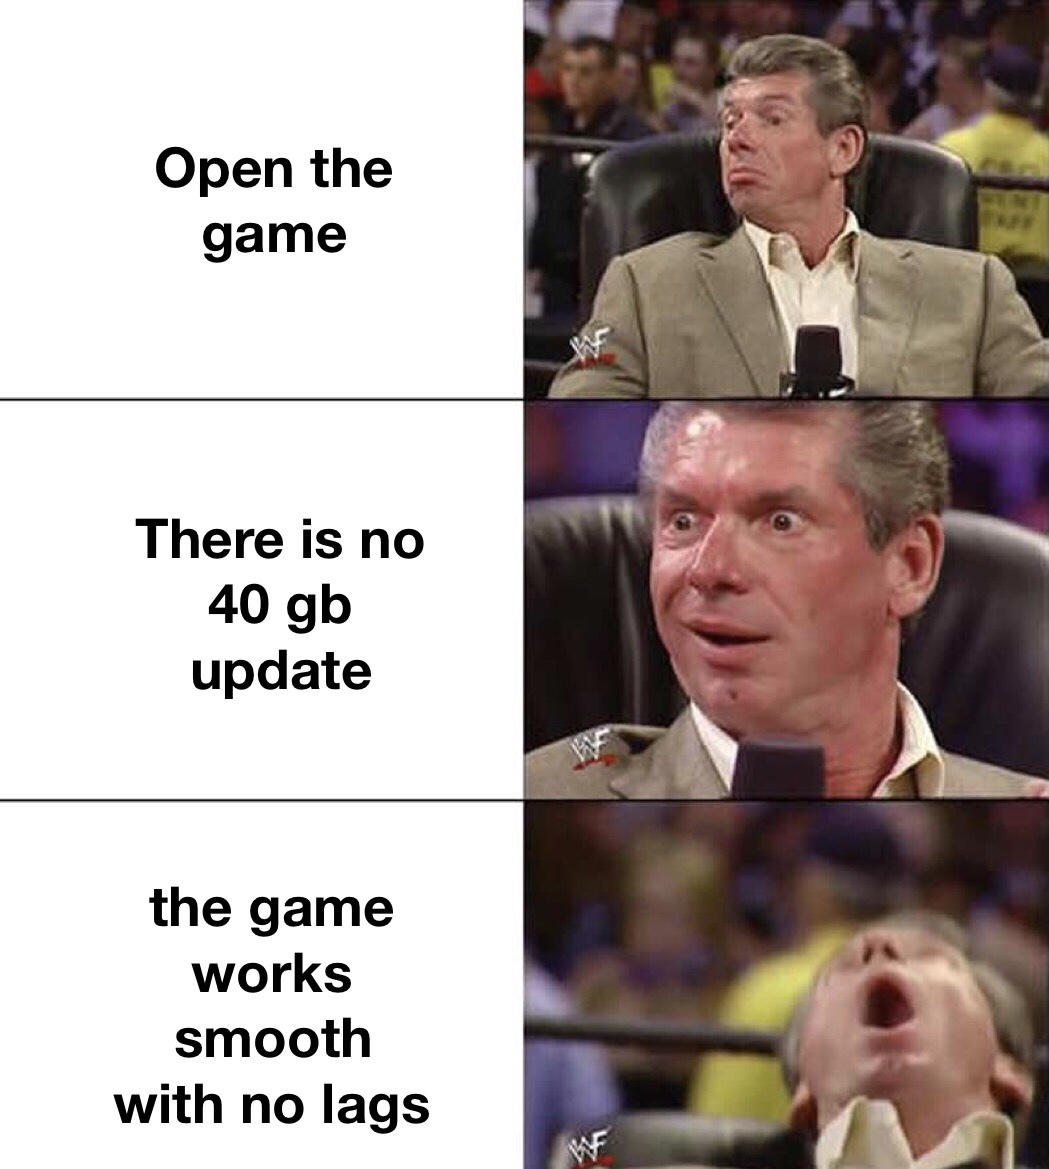 programming memes - Open the game There is no 40 gb update the game works smooth with no lags